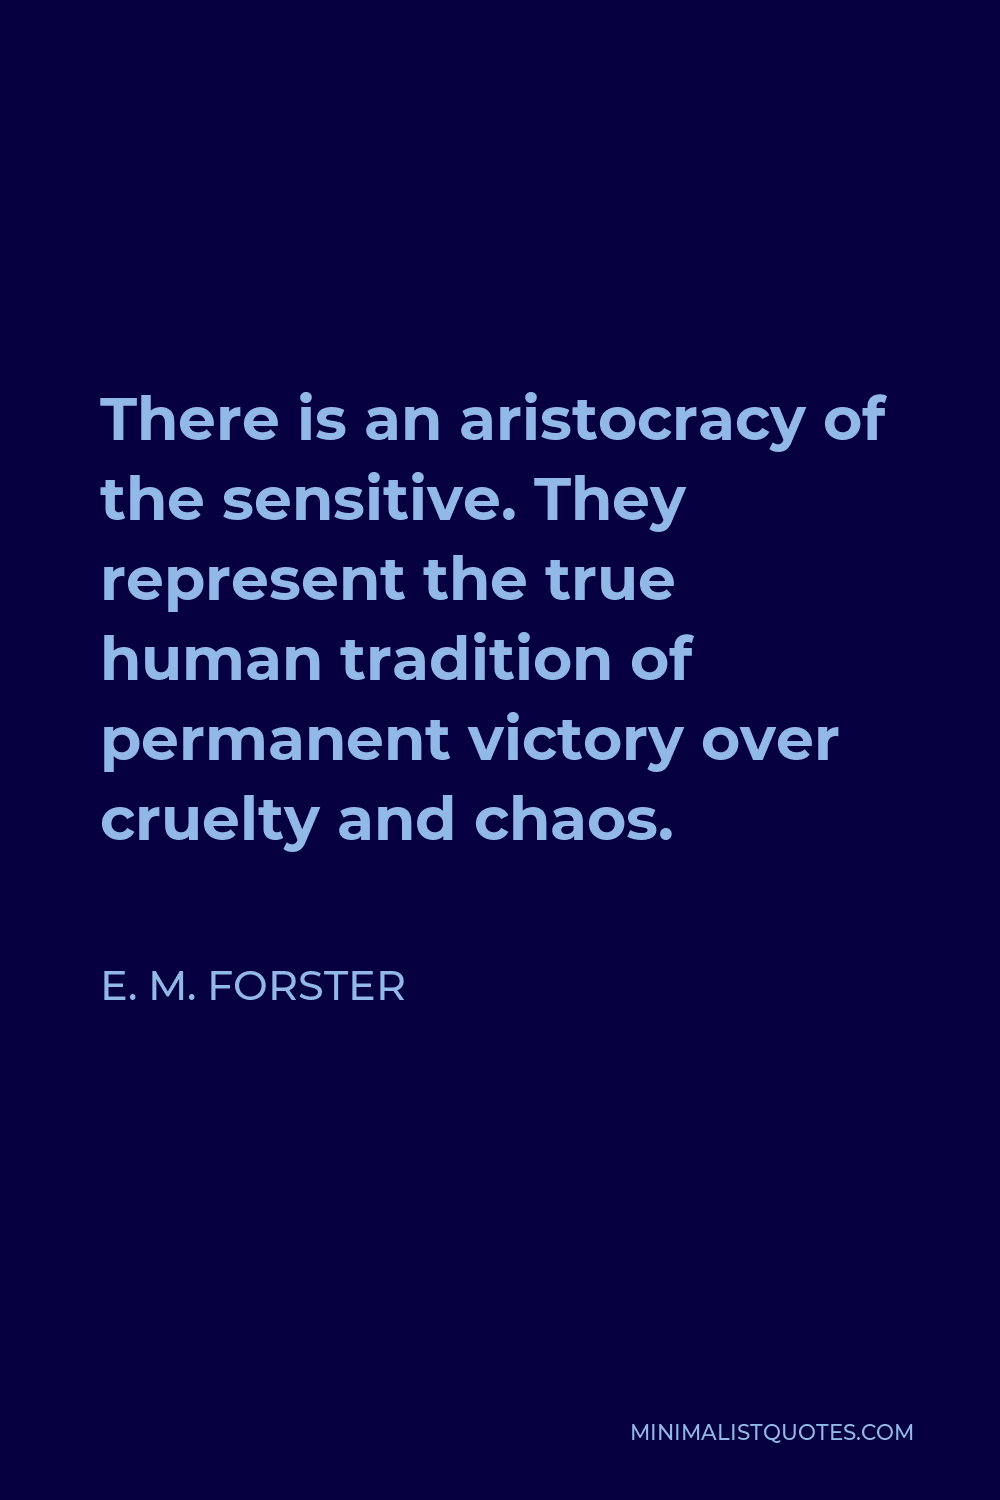 E. M. Forster Quote - There is an aristocracy of the sensitive. They represent the true human tradition of permanent victory over cruelty and chaos.